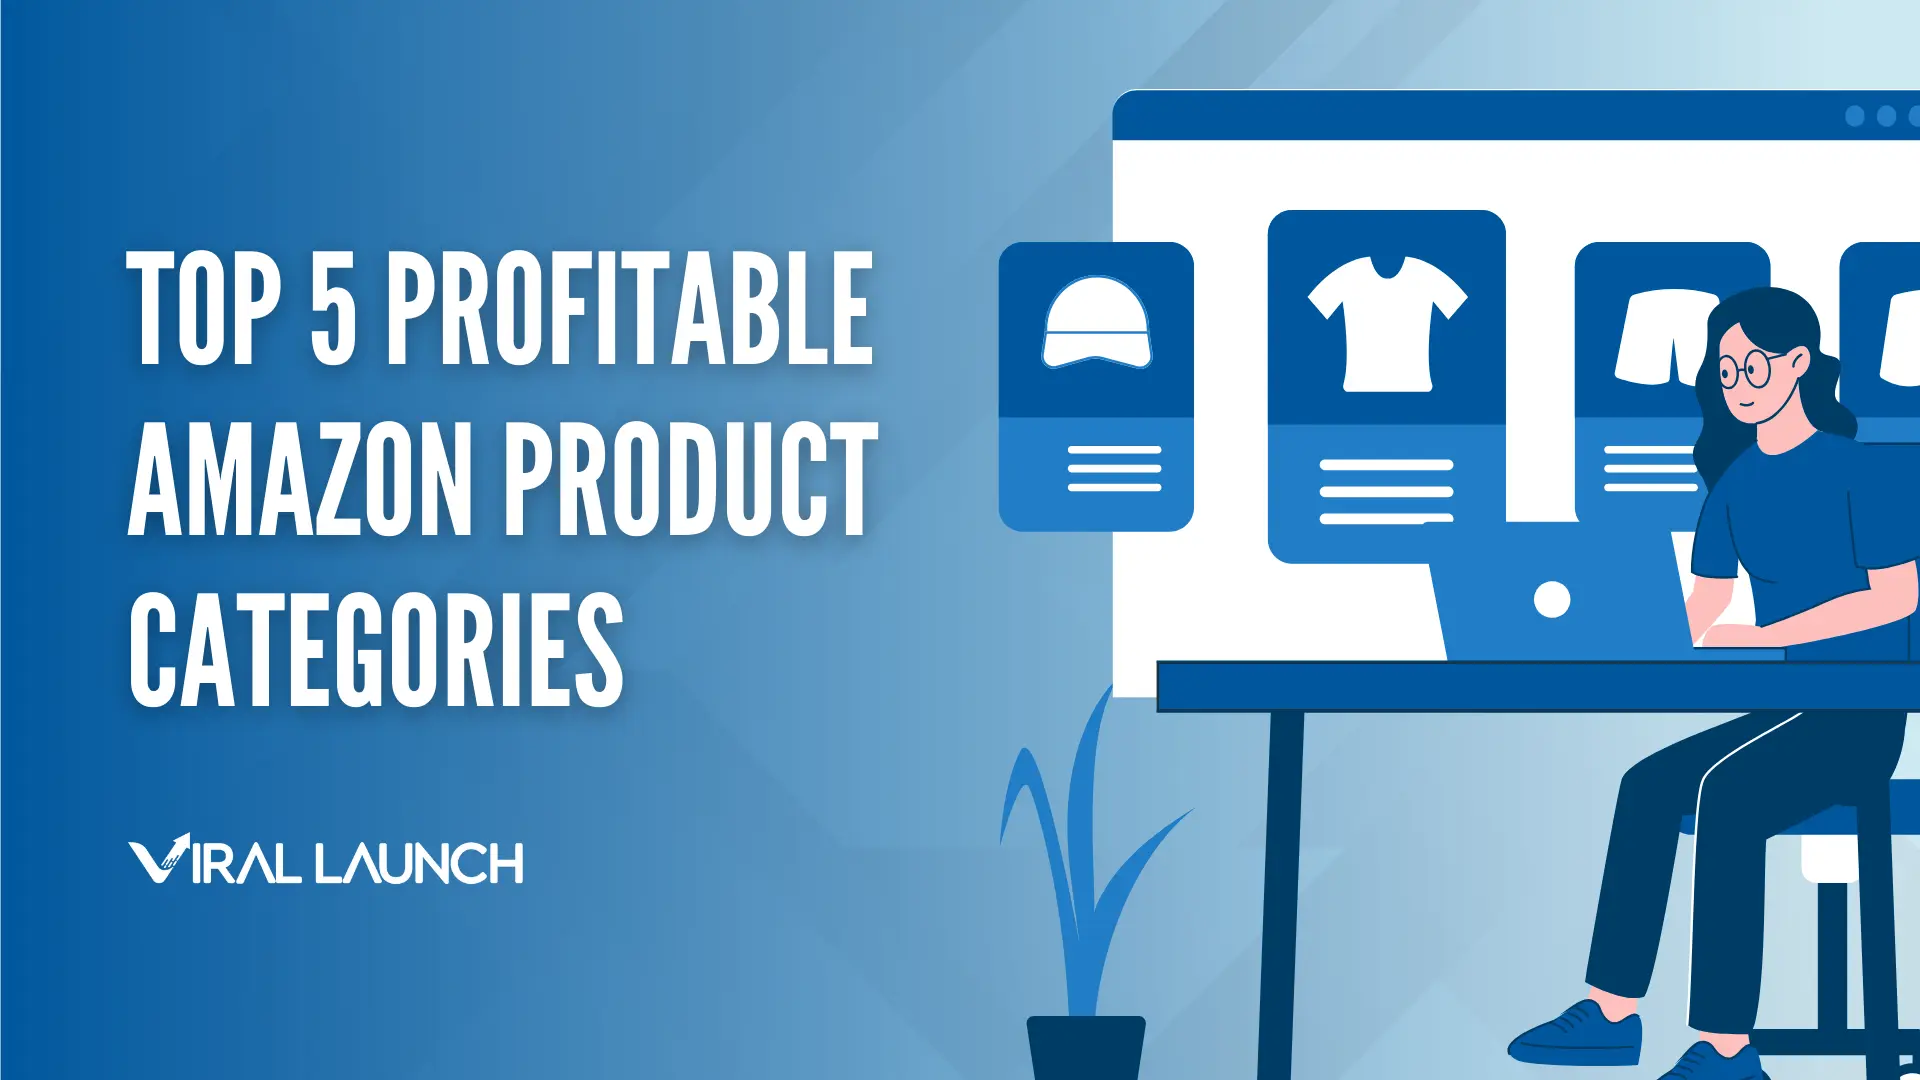 Top 5 most profitable Amazon product categories.